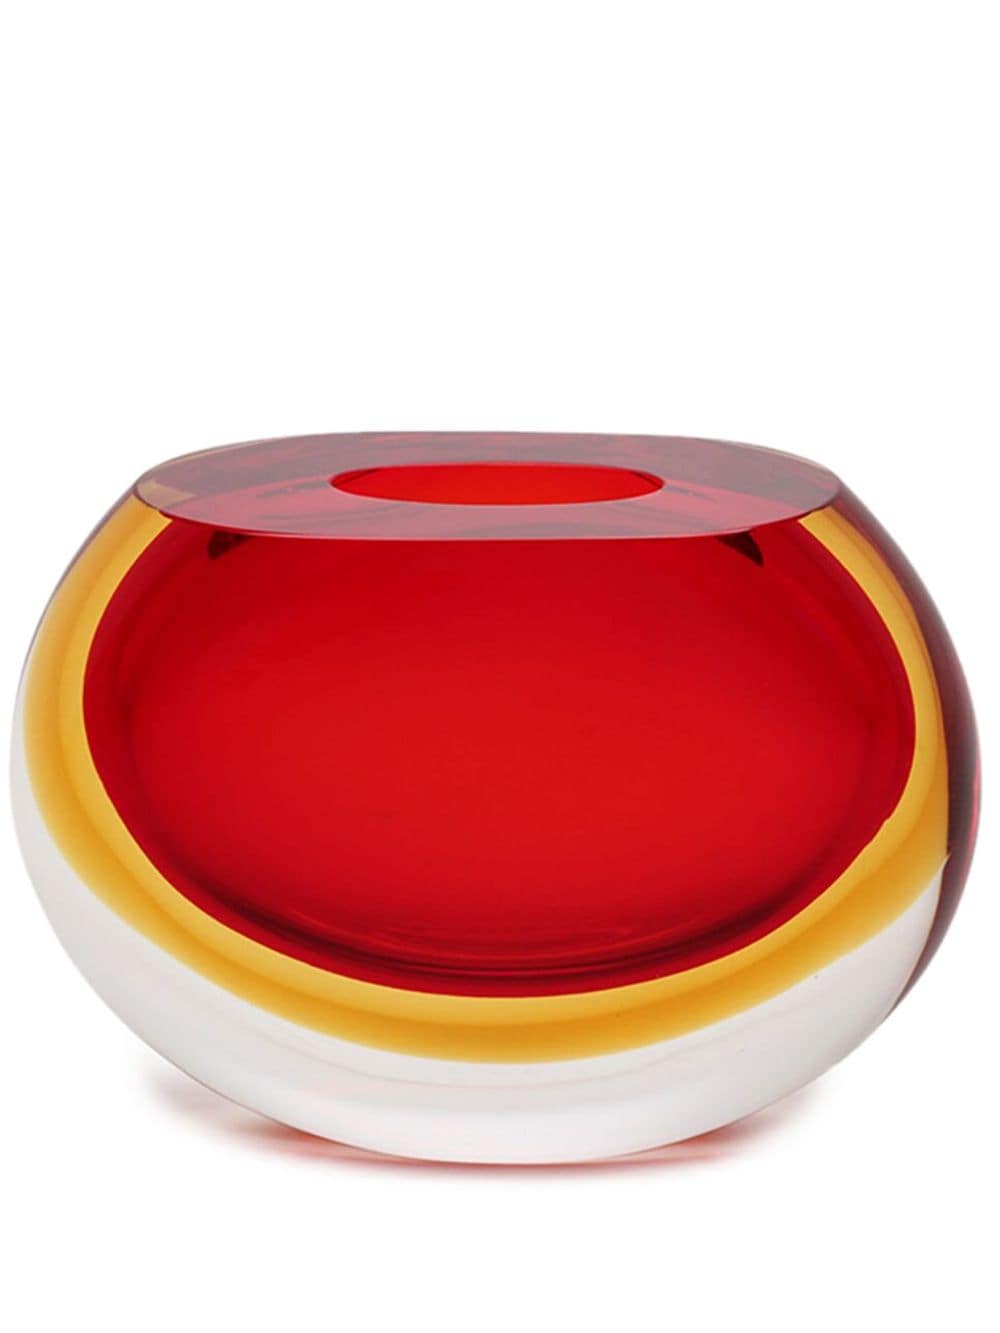 Gardeco 92 Two-tone Murano Glass Vase In Red